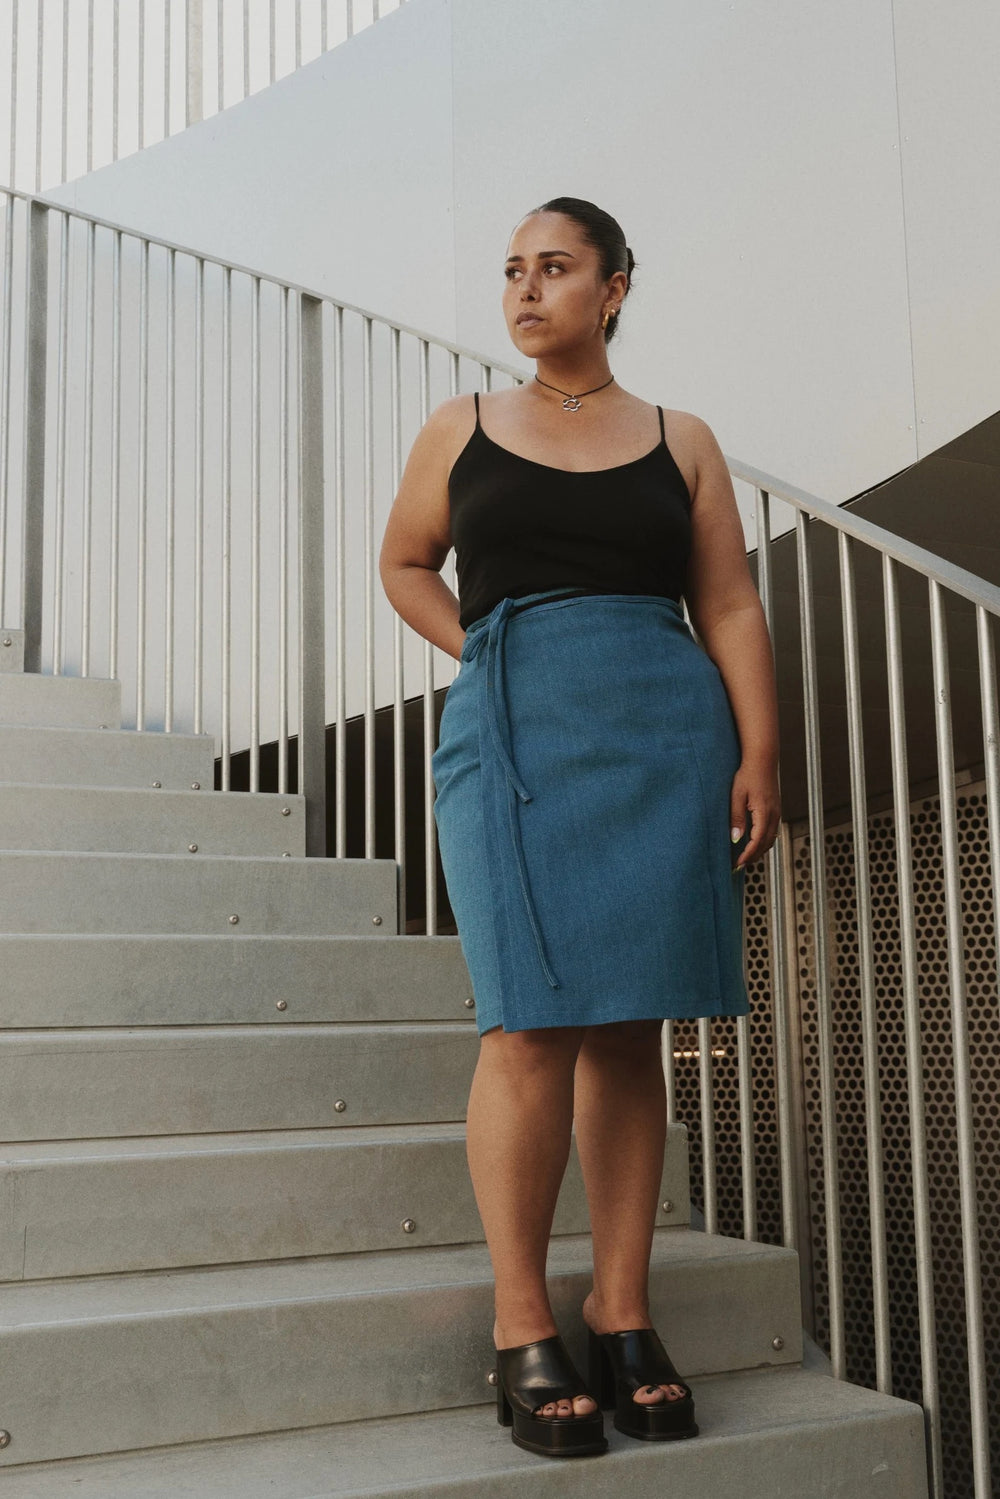 Woman wearing the Strap Wrap Skirt sewing pattern from Puff and Pencil on The Fold Line. A wrap skirt pattern made in light jacquard, satin, thin wool qualities, linen and light denim fabrics, featuring a high-waist, knee-length, waist ties, front left si